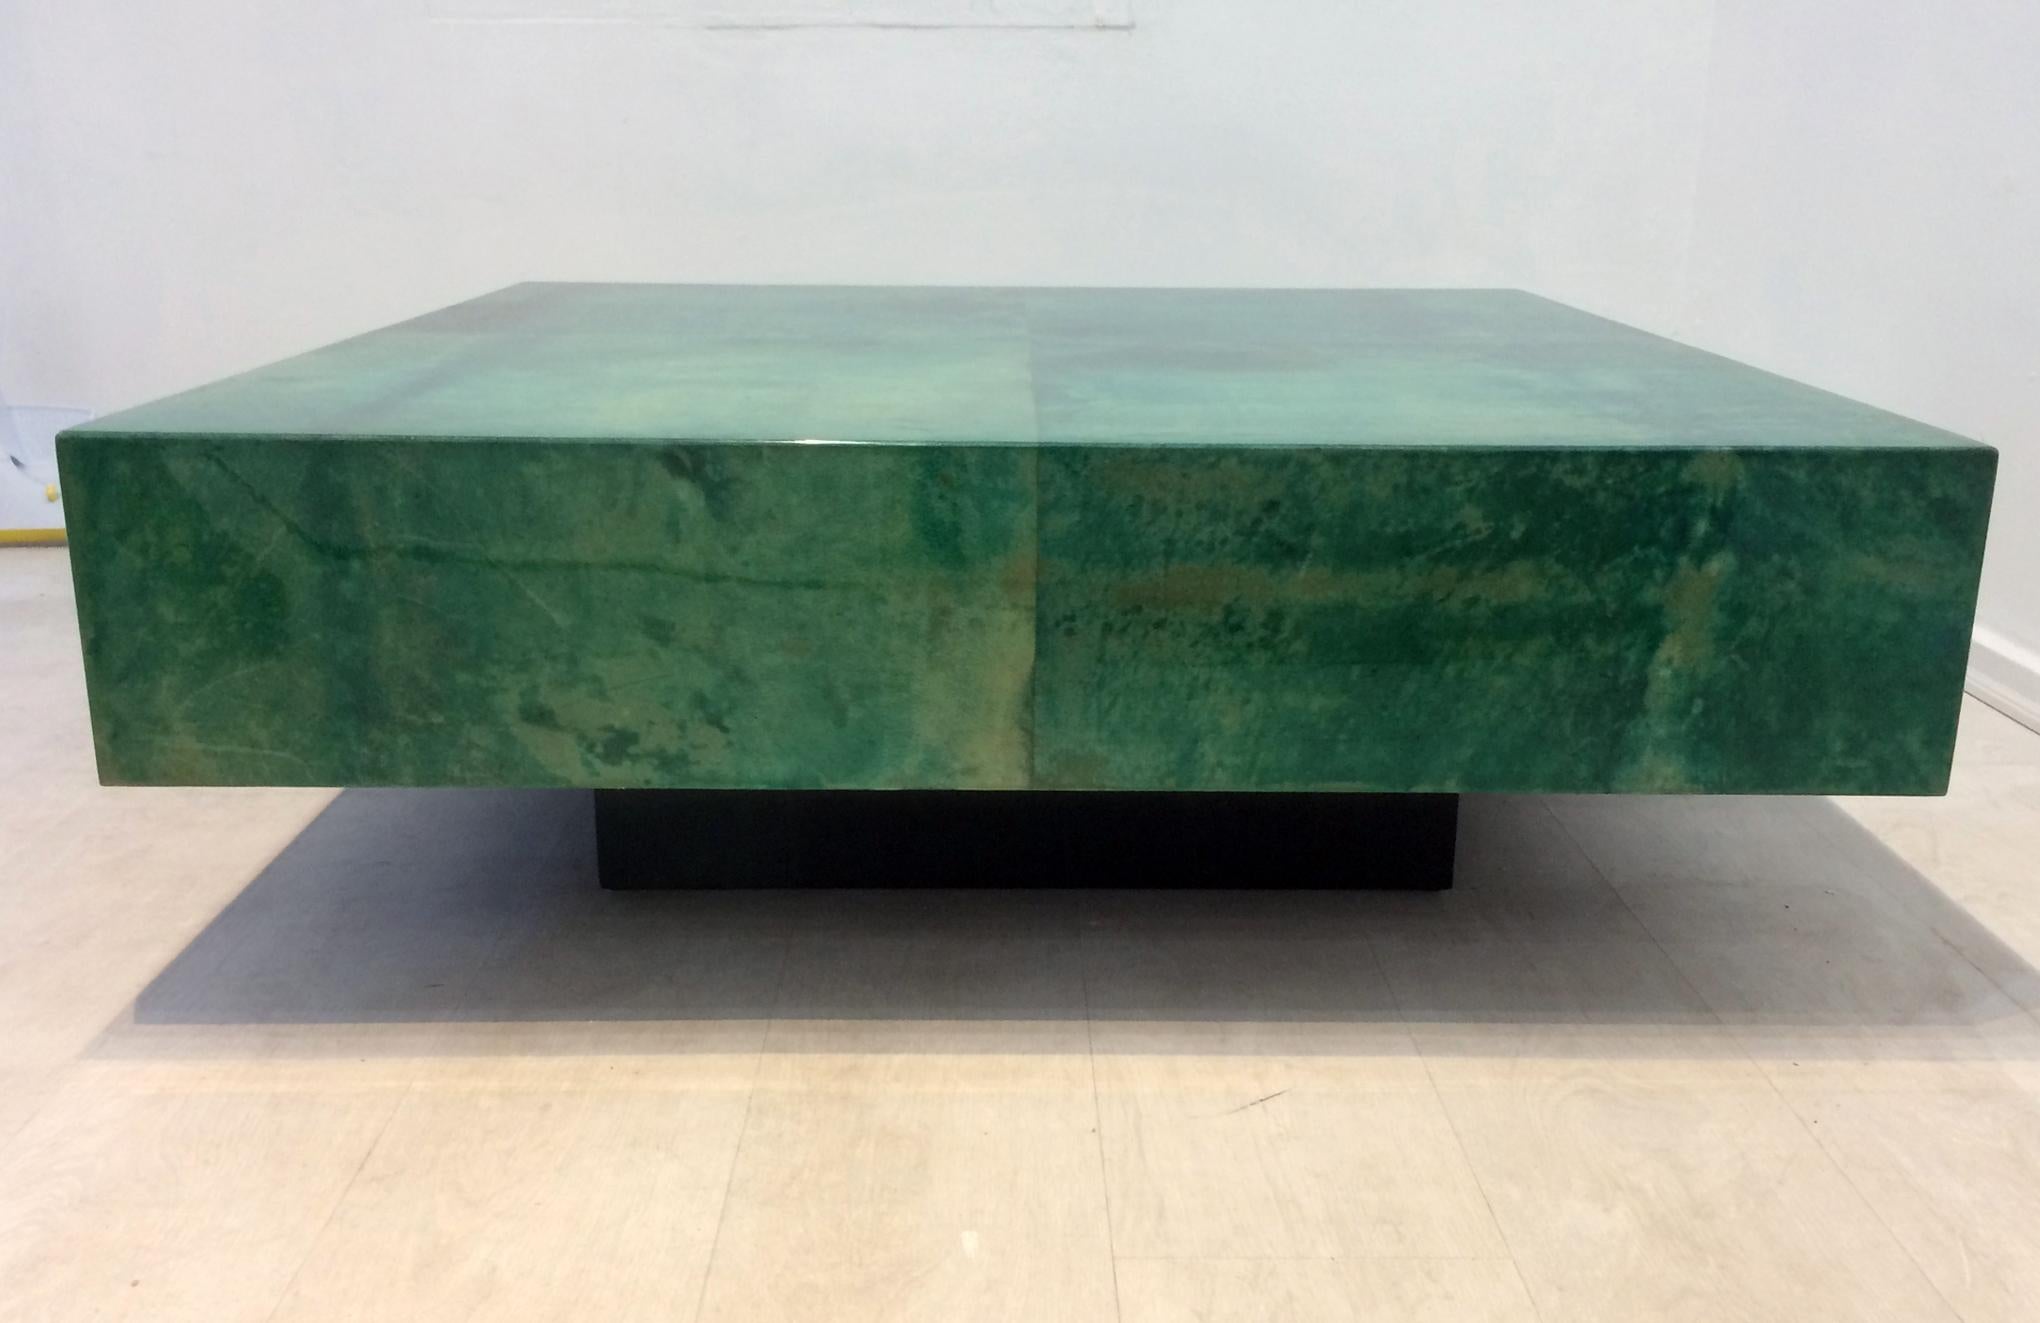 Aldo Tura square coffee table in dyed green goatskin parchment Lacquered finish in very good condition with no damage or chipping to finish or goatskin parchment. An exceptional table in excellent vintage condition.